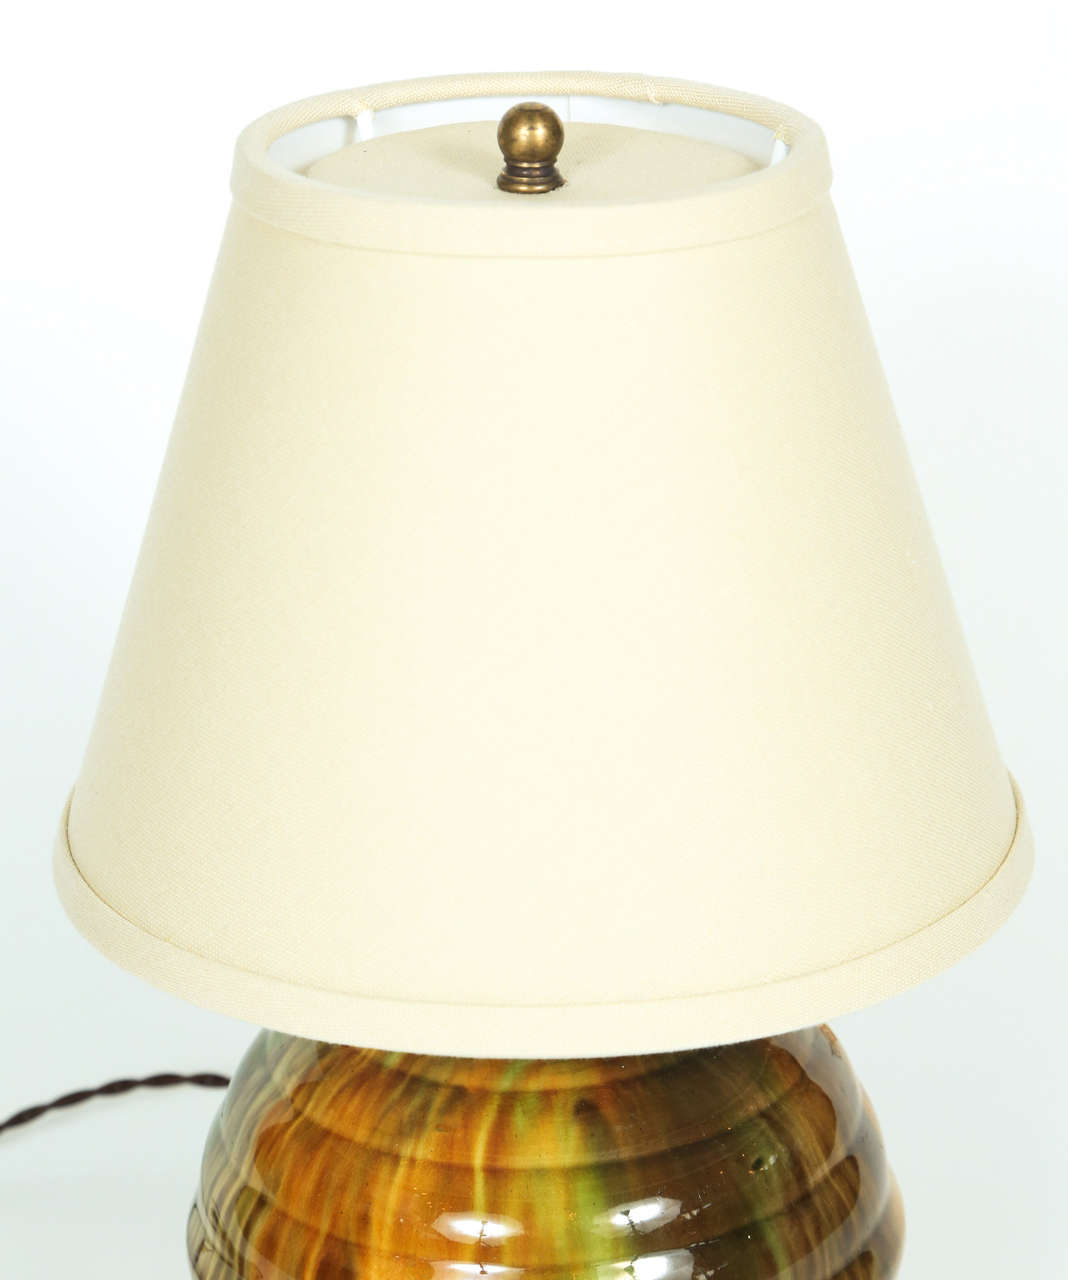 American Vintage Pottery Lamp